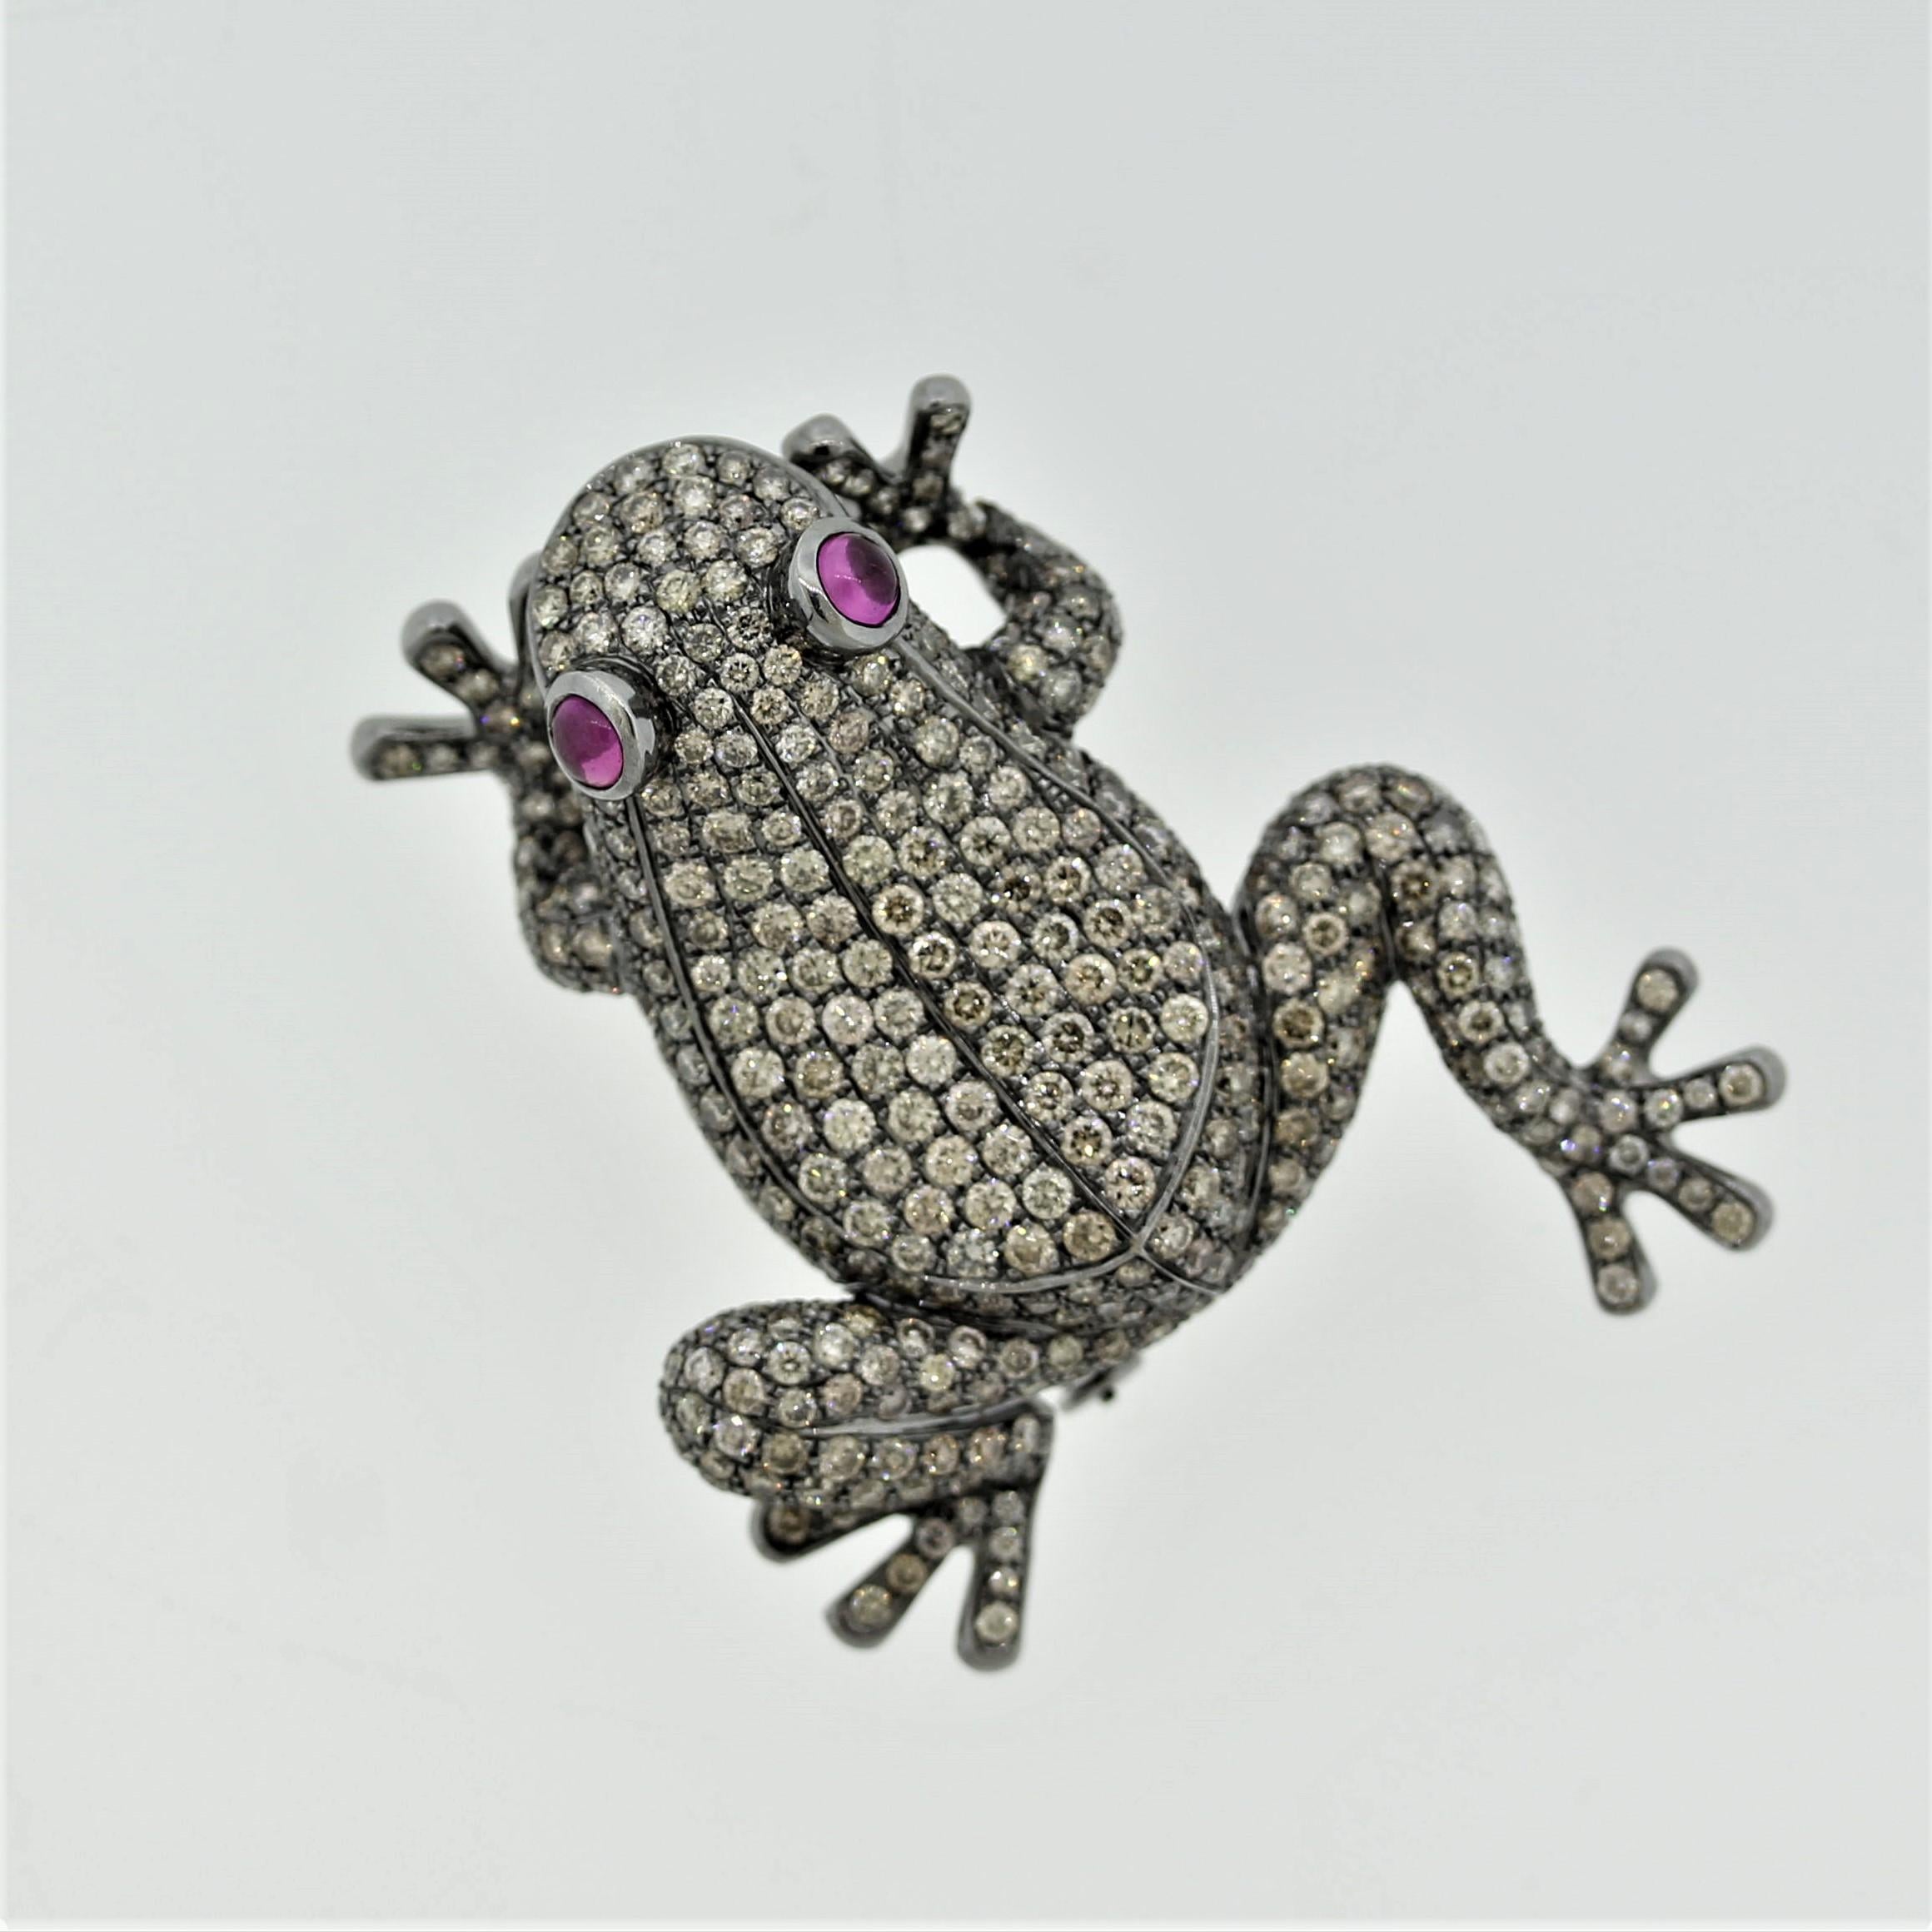 A diamond studded gold frog hopping about! It features 6.22 carats of round brilliant-cut diamonds with a soft and subtle fancy chocolaty color. It has 2 ruby cabochons as its eyes. The piece is made in 18k gold with a rhodium finish giving the frog